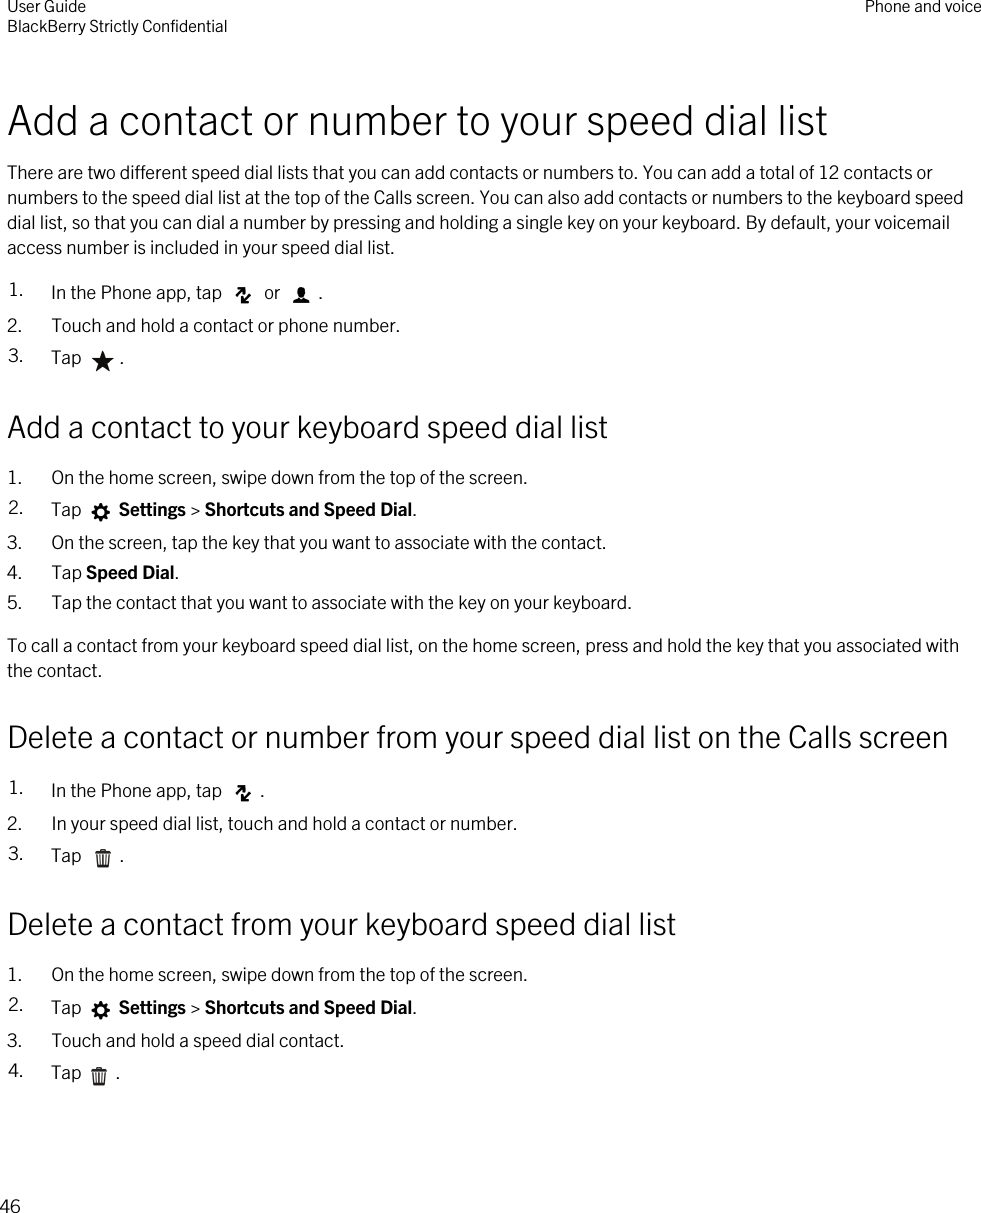 Add a contact or number to your speed dial listThere are two different speed dial lists that you can add contacts or numbers to. You can add a total of 12 contacts or numbers to the speed dial list at the top of the Calls screen. You can also add contacts or numbers to the keyboard speed dial list, so that you can dial a number by pressing and holding a single key on your keyboard. By default, your voicemail access number is included in your speed dial list.1. In the Phone app, tap   or  .2. Touch and hold a contact or phone number.3. Tap  .Add a contact to your keyboard speed dial list1. On the home screen, swipe down from the top of the screen.2. Tap   Settings &gt; Shortcuts and Speed Dial.3. On the screen, tap the key that you want to associate with the contact.4. Tap Speed Dial.5. Tap the contact that you want to associate with the key on your keyboard.To call a contact from your keyboard speed dial list, on the home screen, press and hold the key that you associated with the contact.Delete a contact or number from your speed dial list on the Calls screen1. In the Phone app, tap  .2. In your speed dial list, touch and hold a contact or number.3. Tap  .Delete a contact from your keyboard speed dial list1. On the home screen, swipe down from the top of the screen.2. Tap   Settings &gt; Shortcuts and Speed Dial.3. Touch and hold a speed dial contact.4. Tap .User GuideBlackBerry Strictly Confidential Phone and voice46